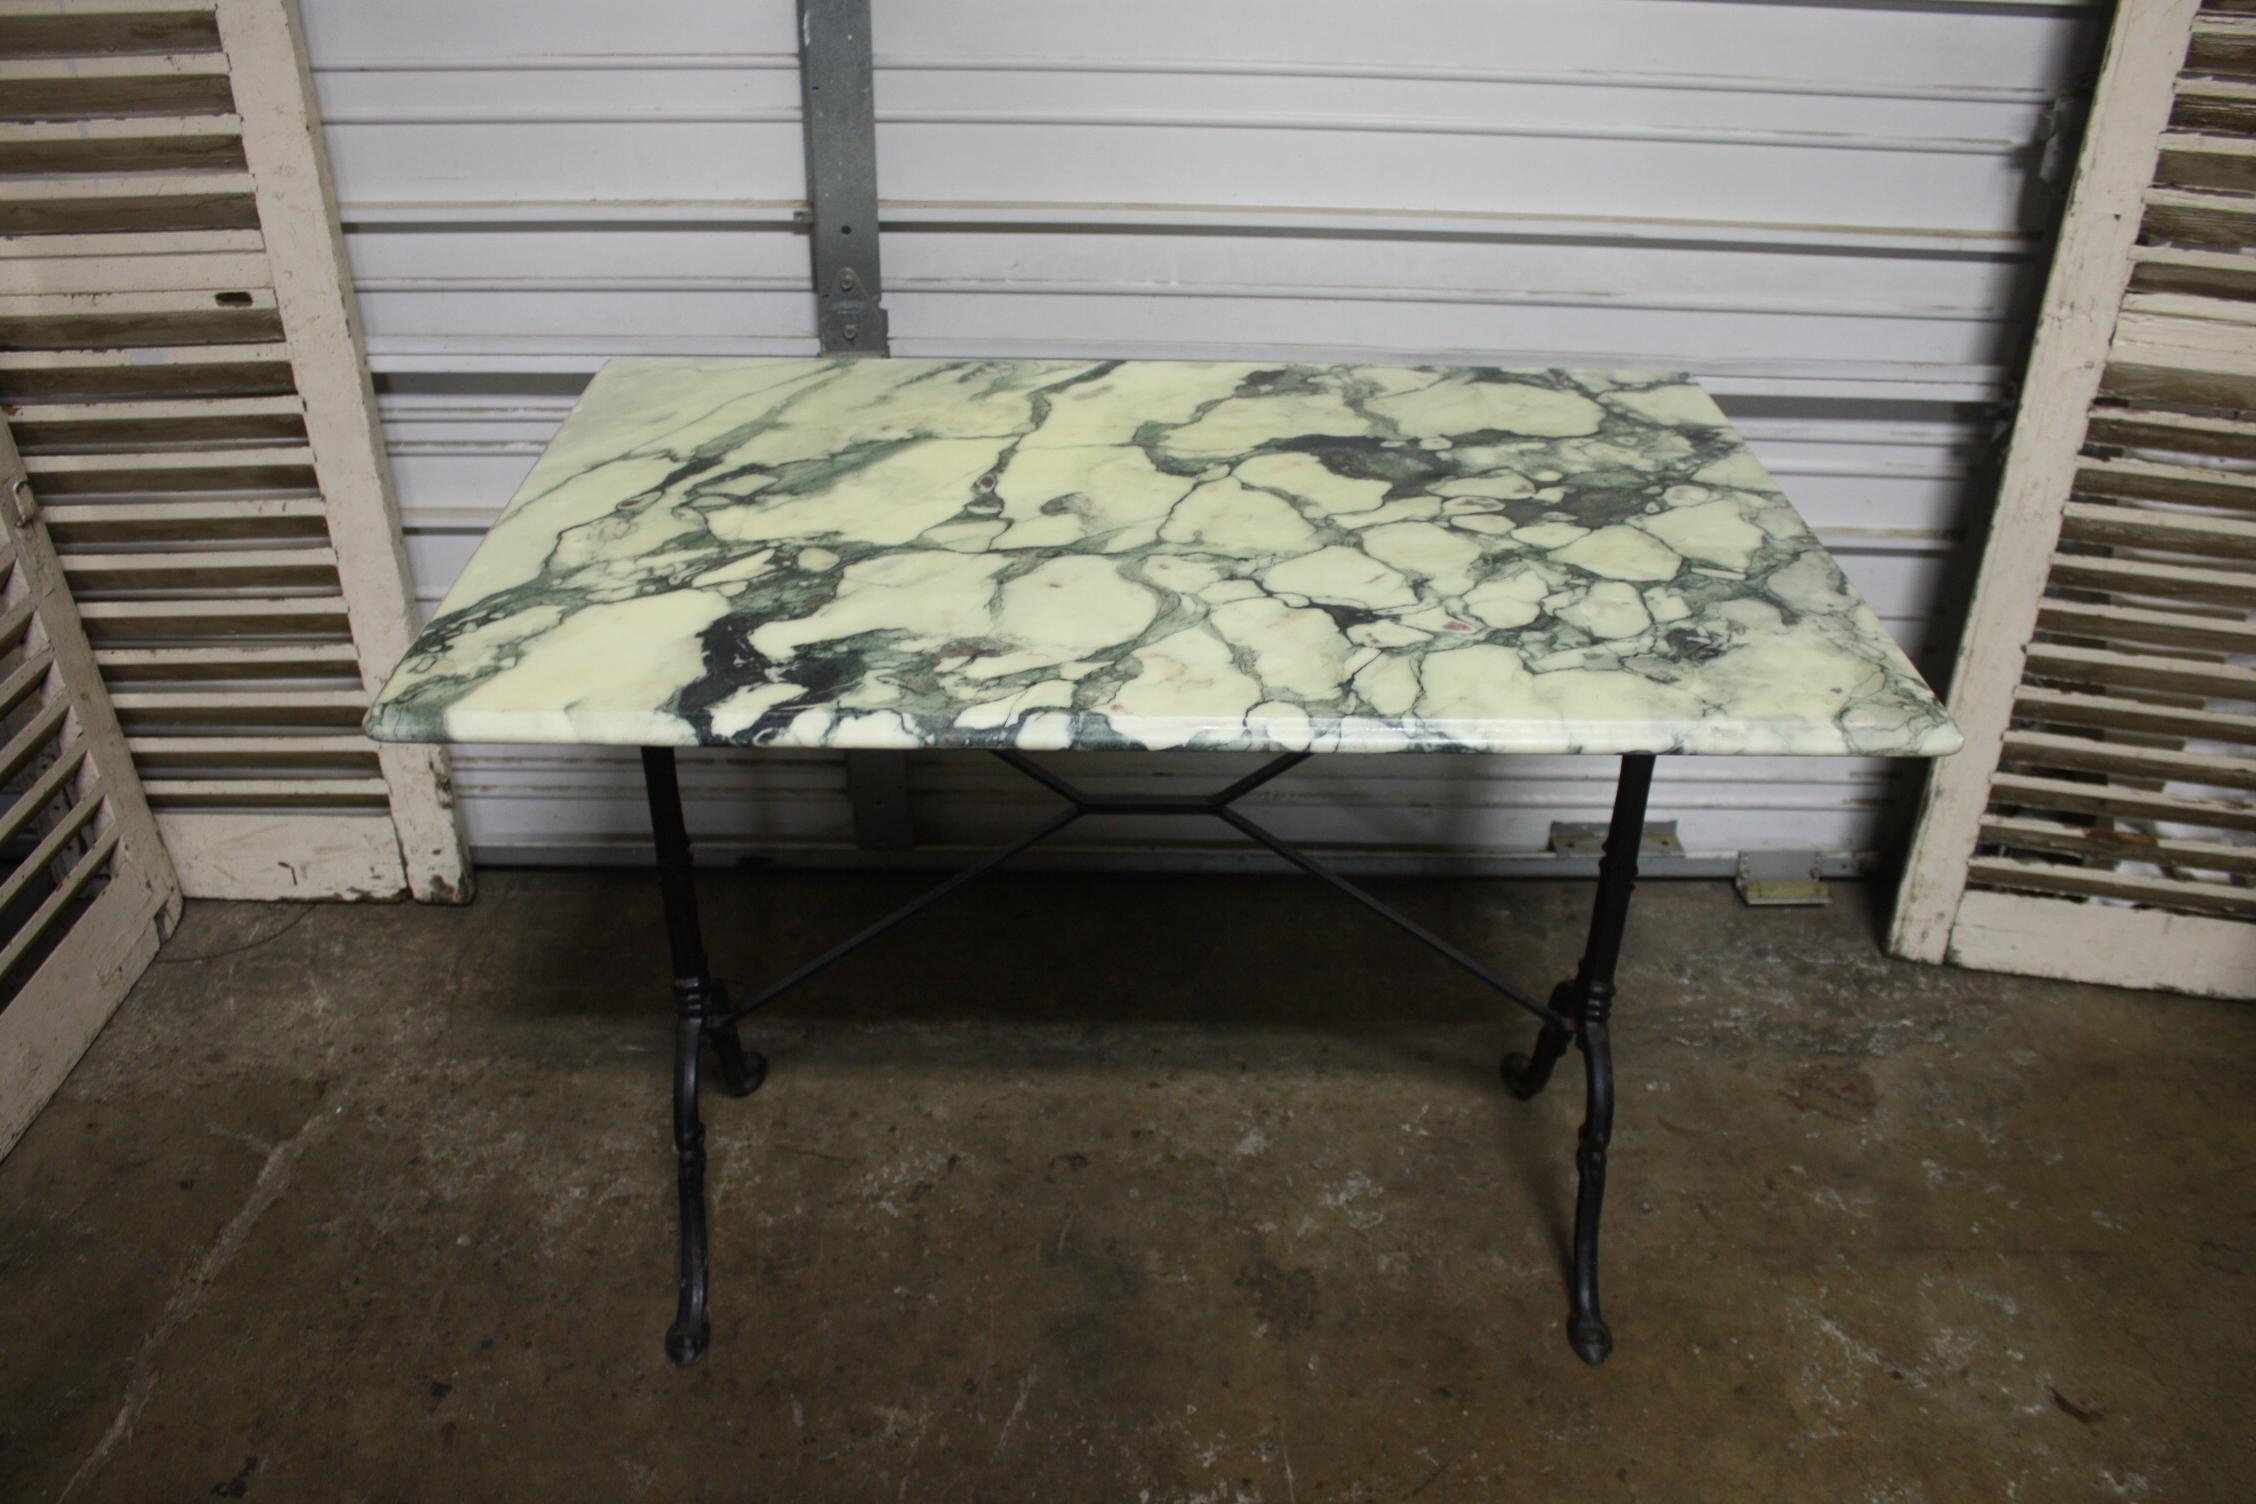 This bistro table has an amazing marble top with green veins color. It can be put inside or outside.